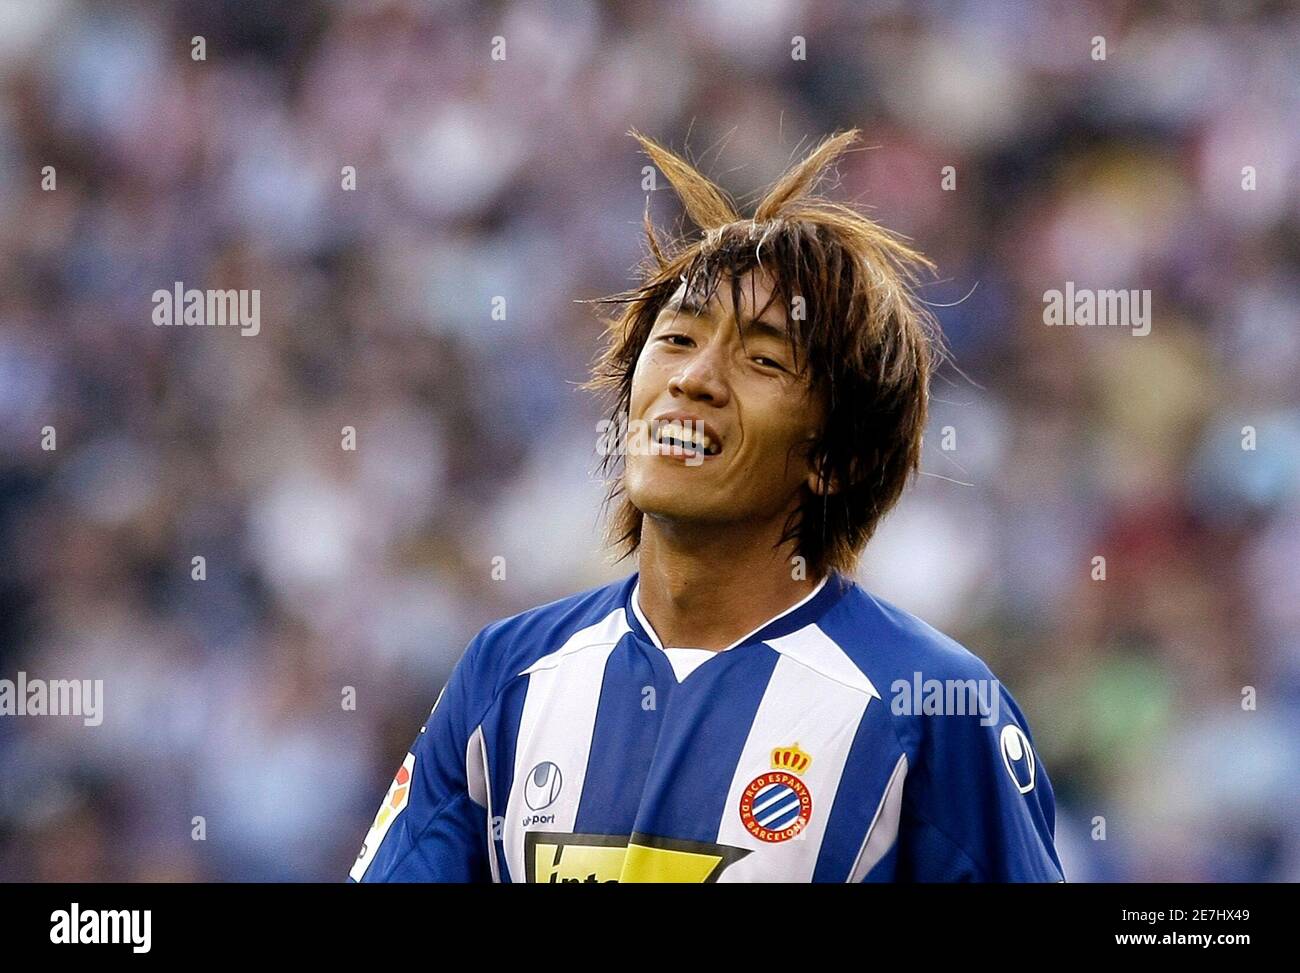 Espanyol's player Shunsuke Nakamura after failed his to goal against Xerez CF goalkeeper Renan Brito during their first division soccer match at Cornella-El Prat stadium in Barcelona 27,